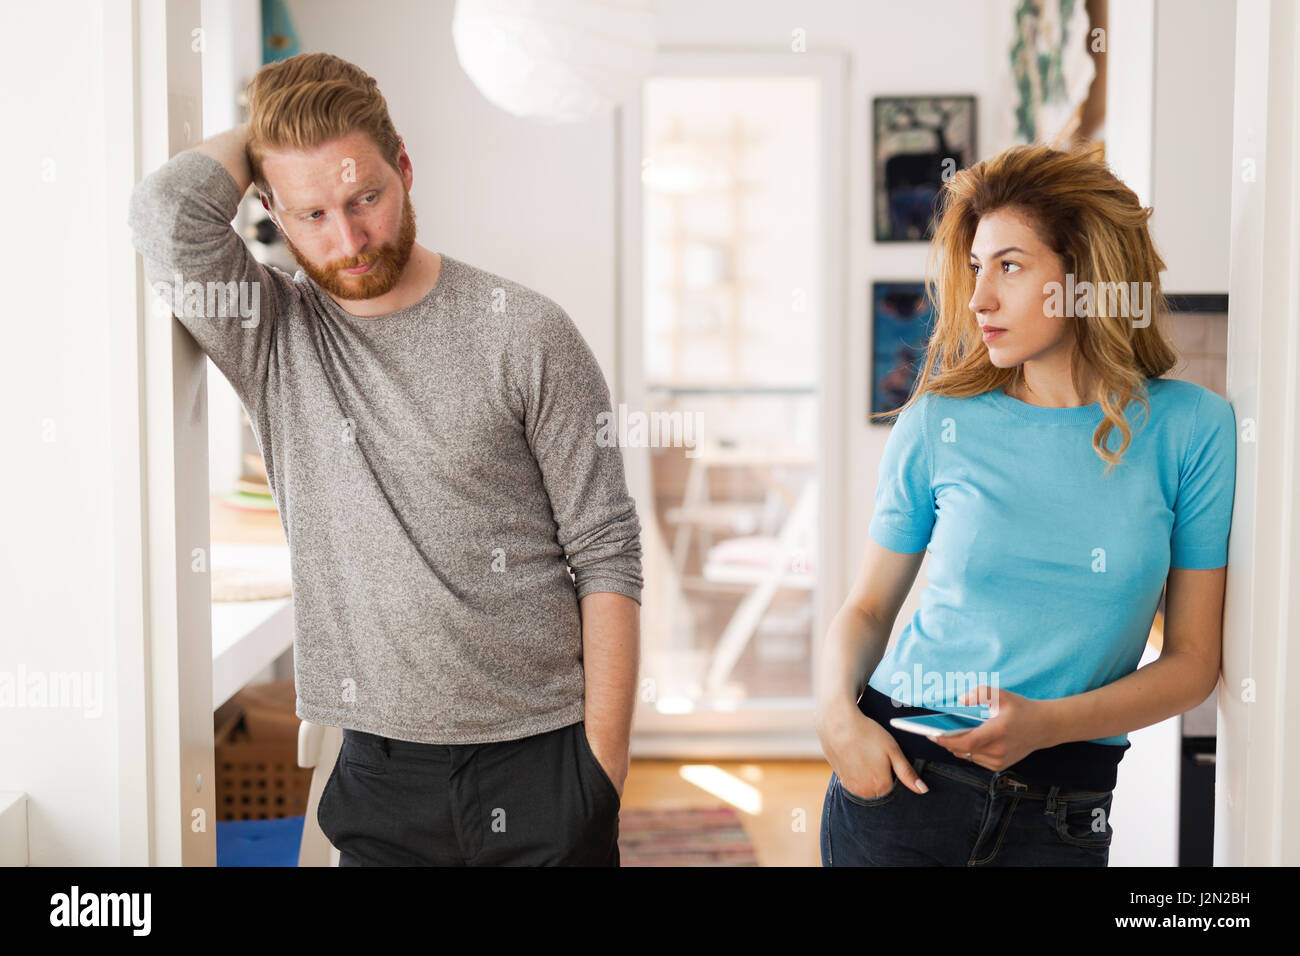 Couple having arguments at home and being frustrated with relationship Stock Photo